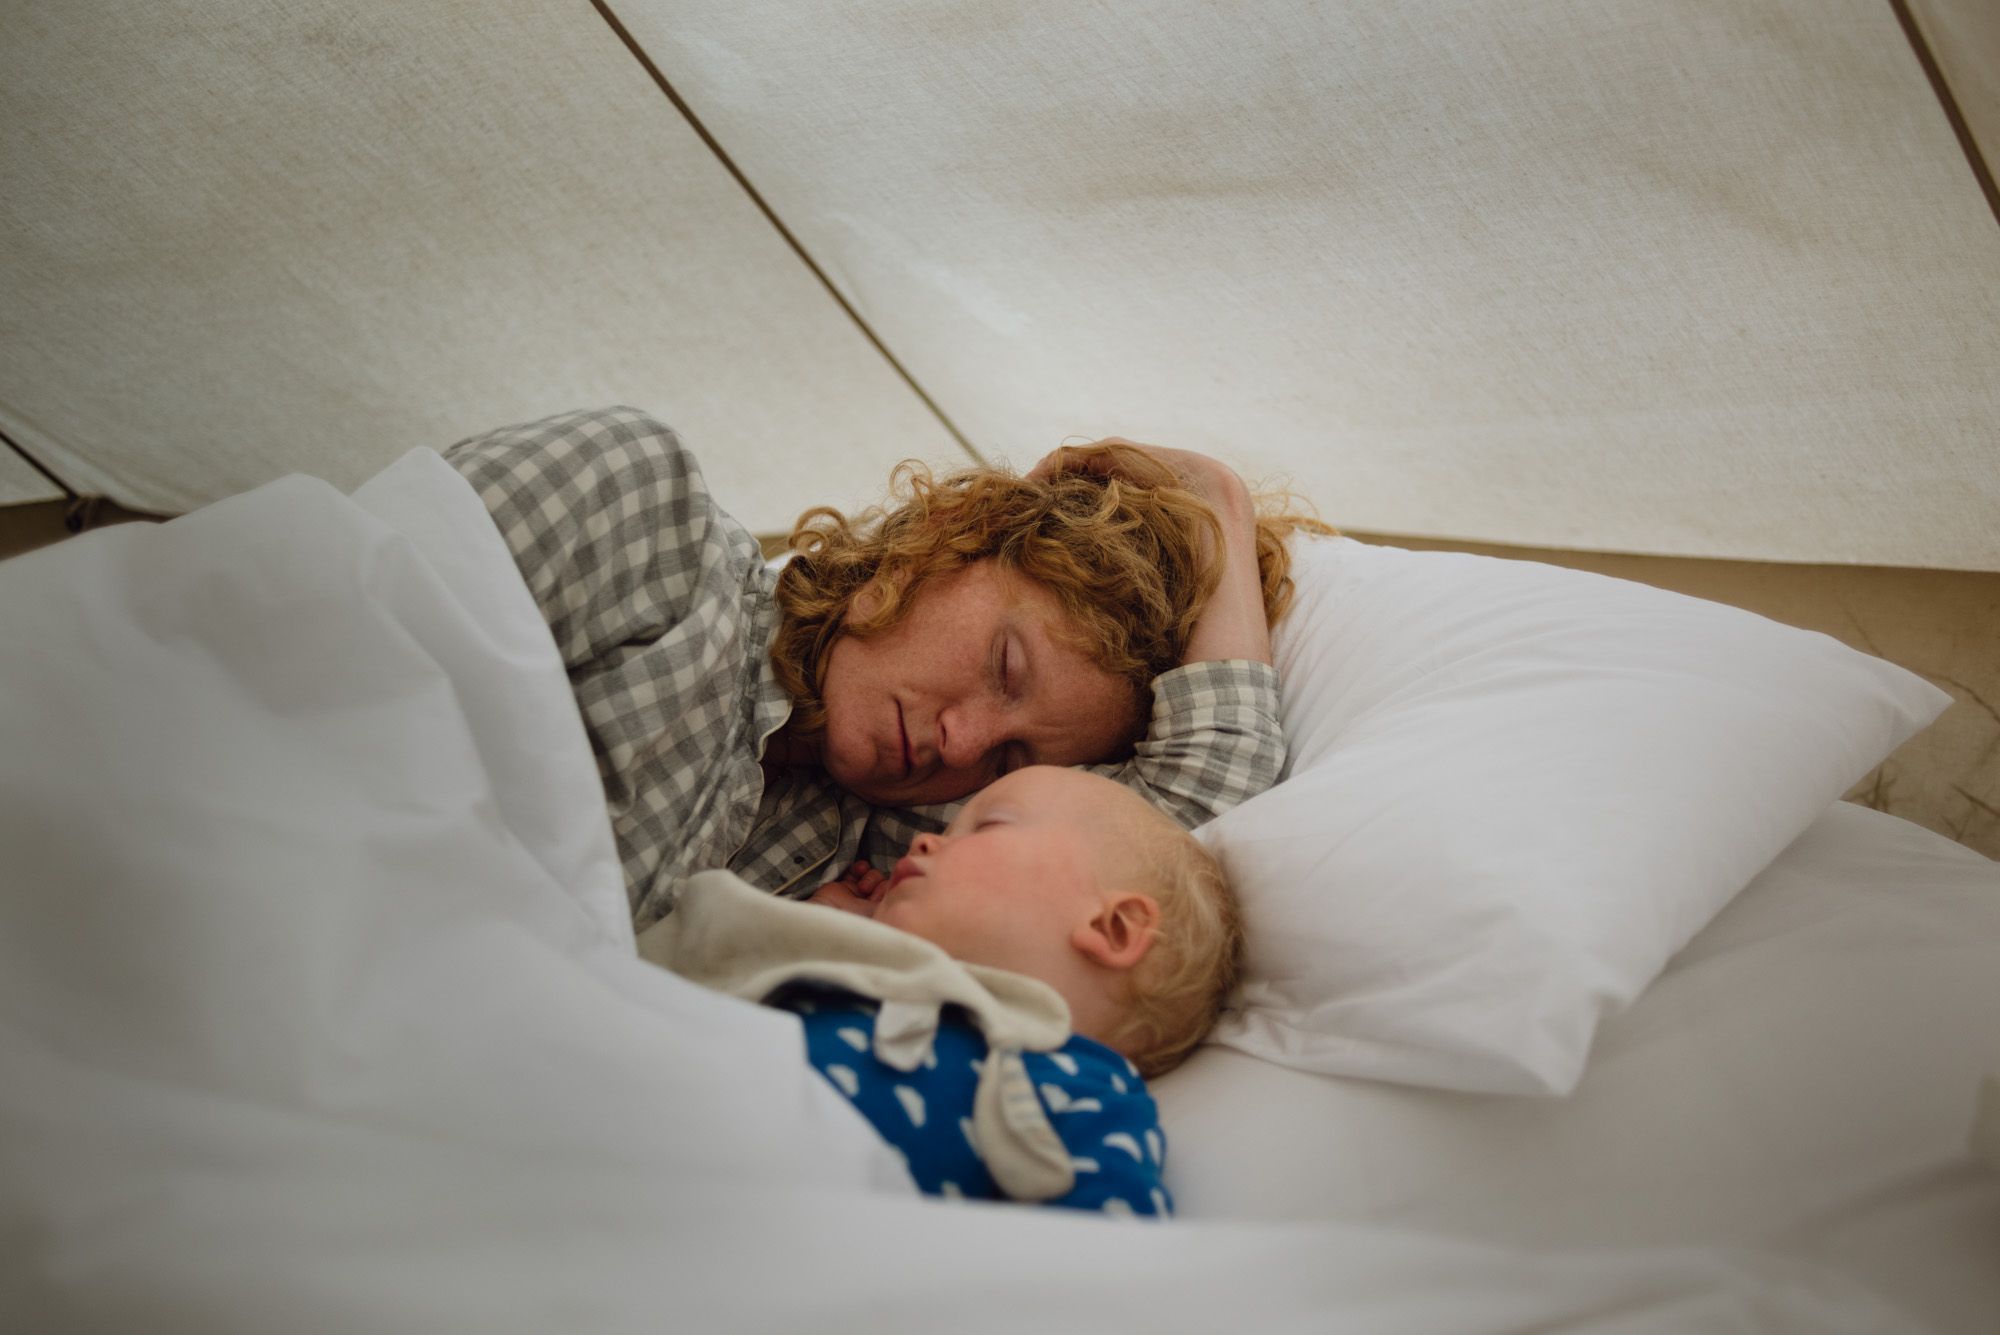 A woman and her young child asleep in a canvas bell tent.